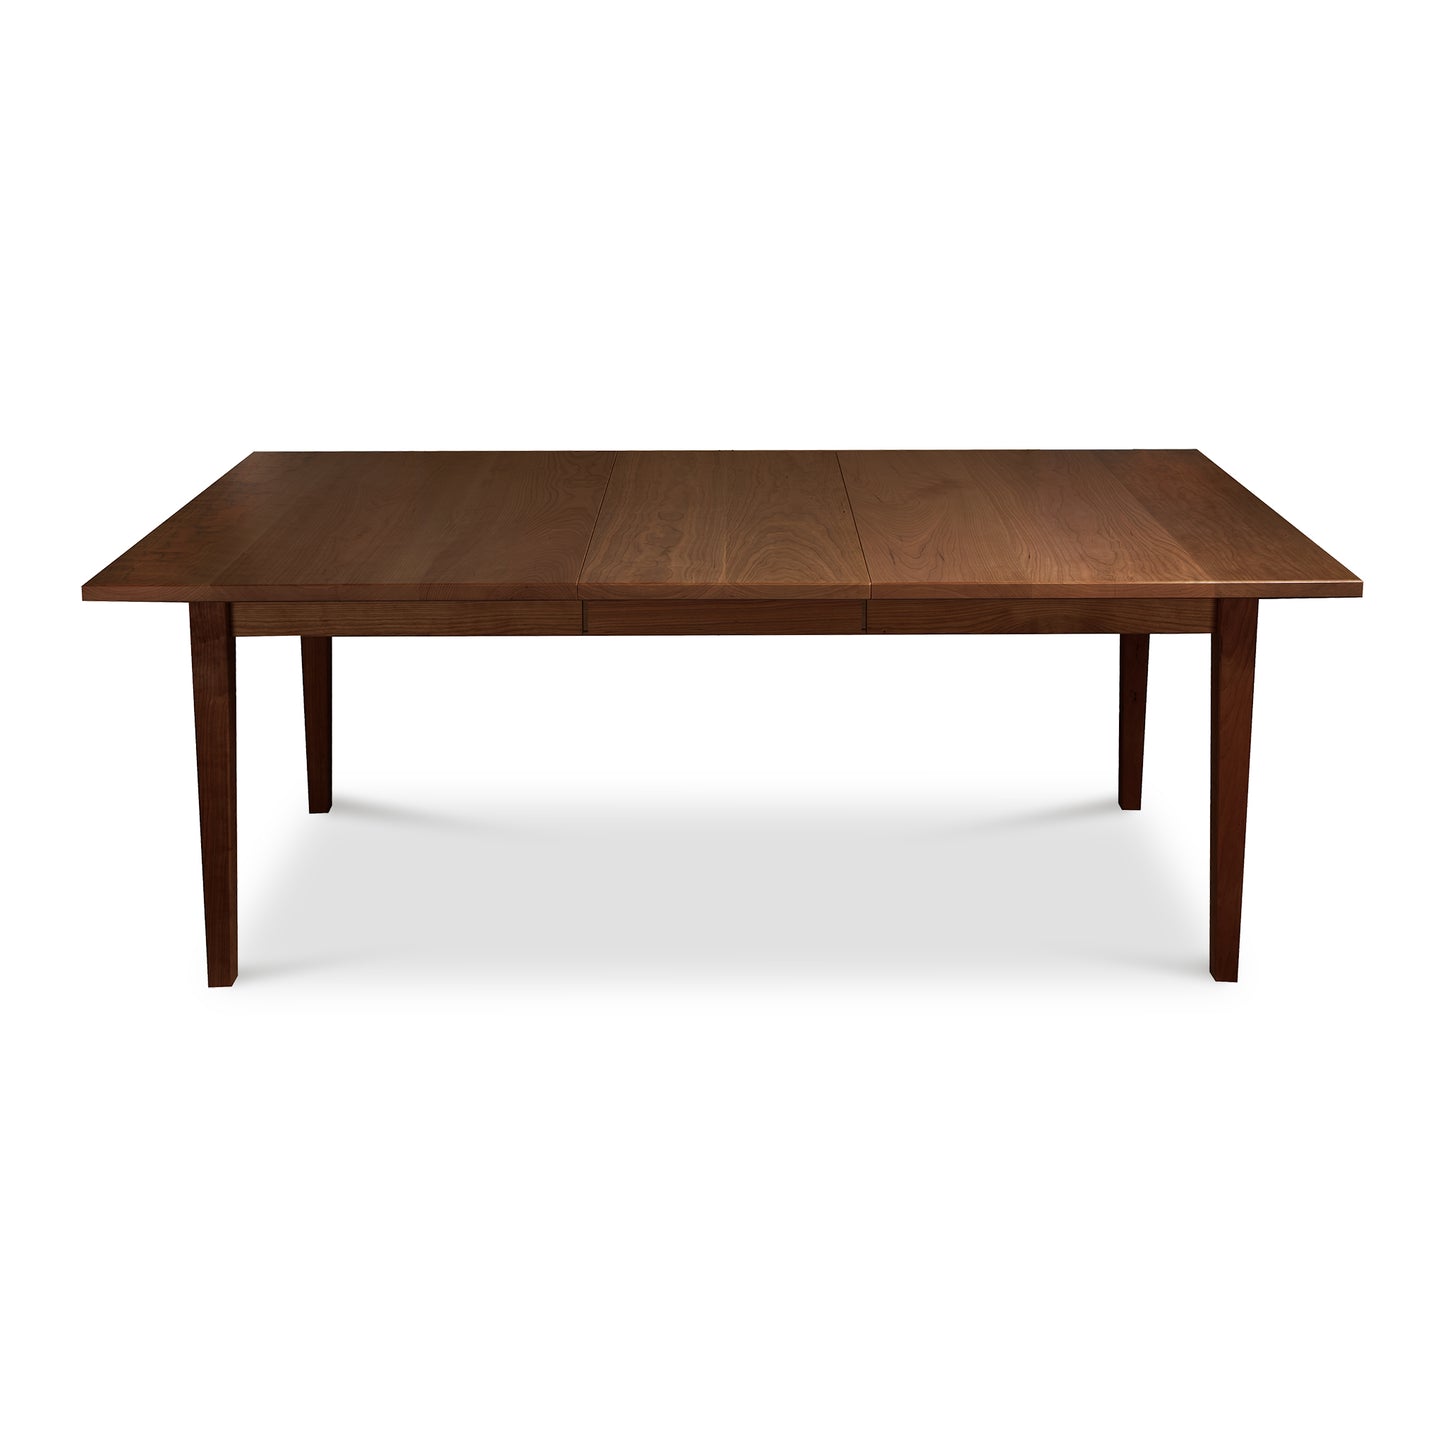 A handcrafted Maple Corner Woodworks Vermont Shaker Rectangular Extension Dining Table made of solid wood with two drawers.